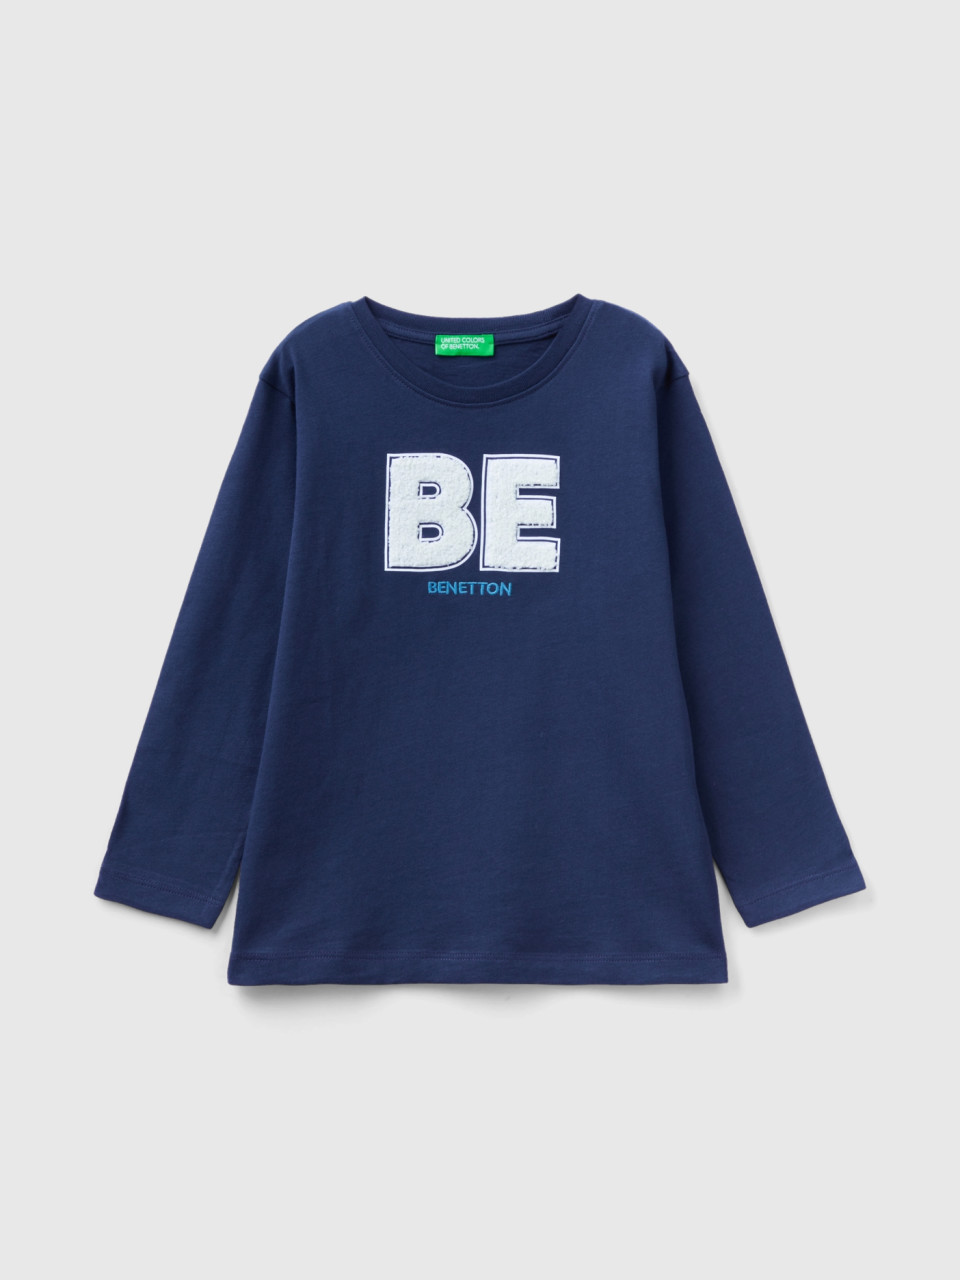 Benetton, T-shirt With Terry Embroidery, Dark Blue, Kids